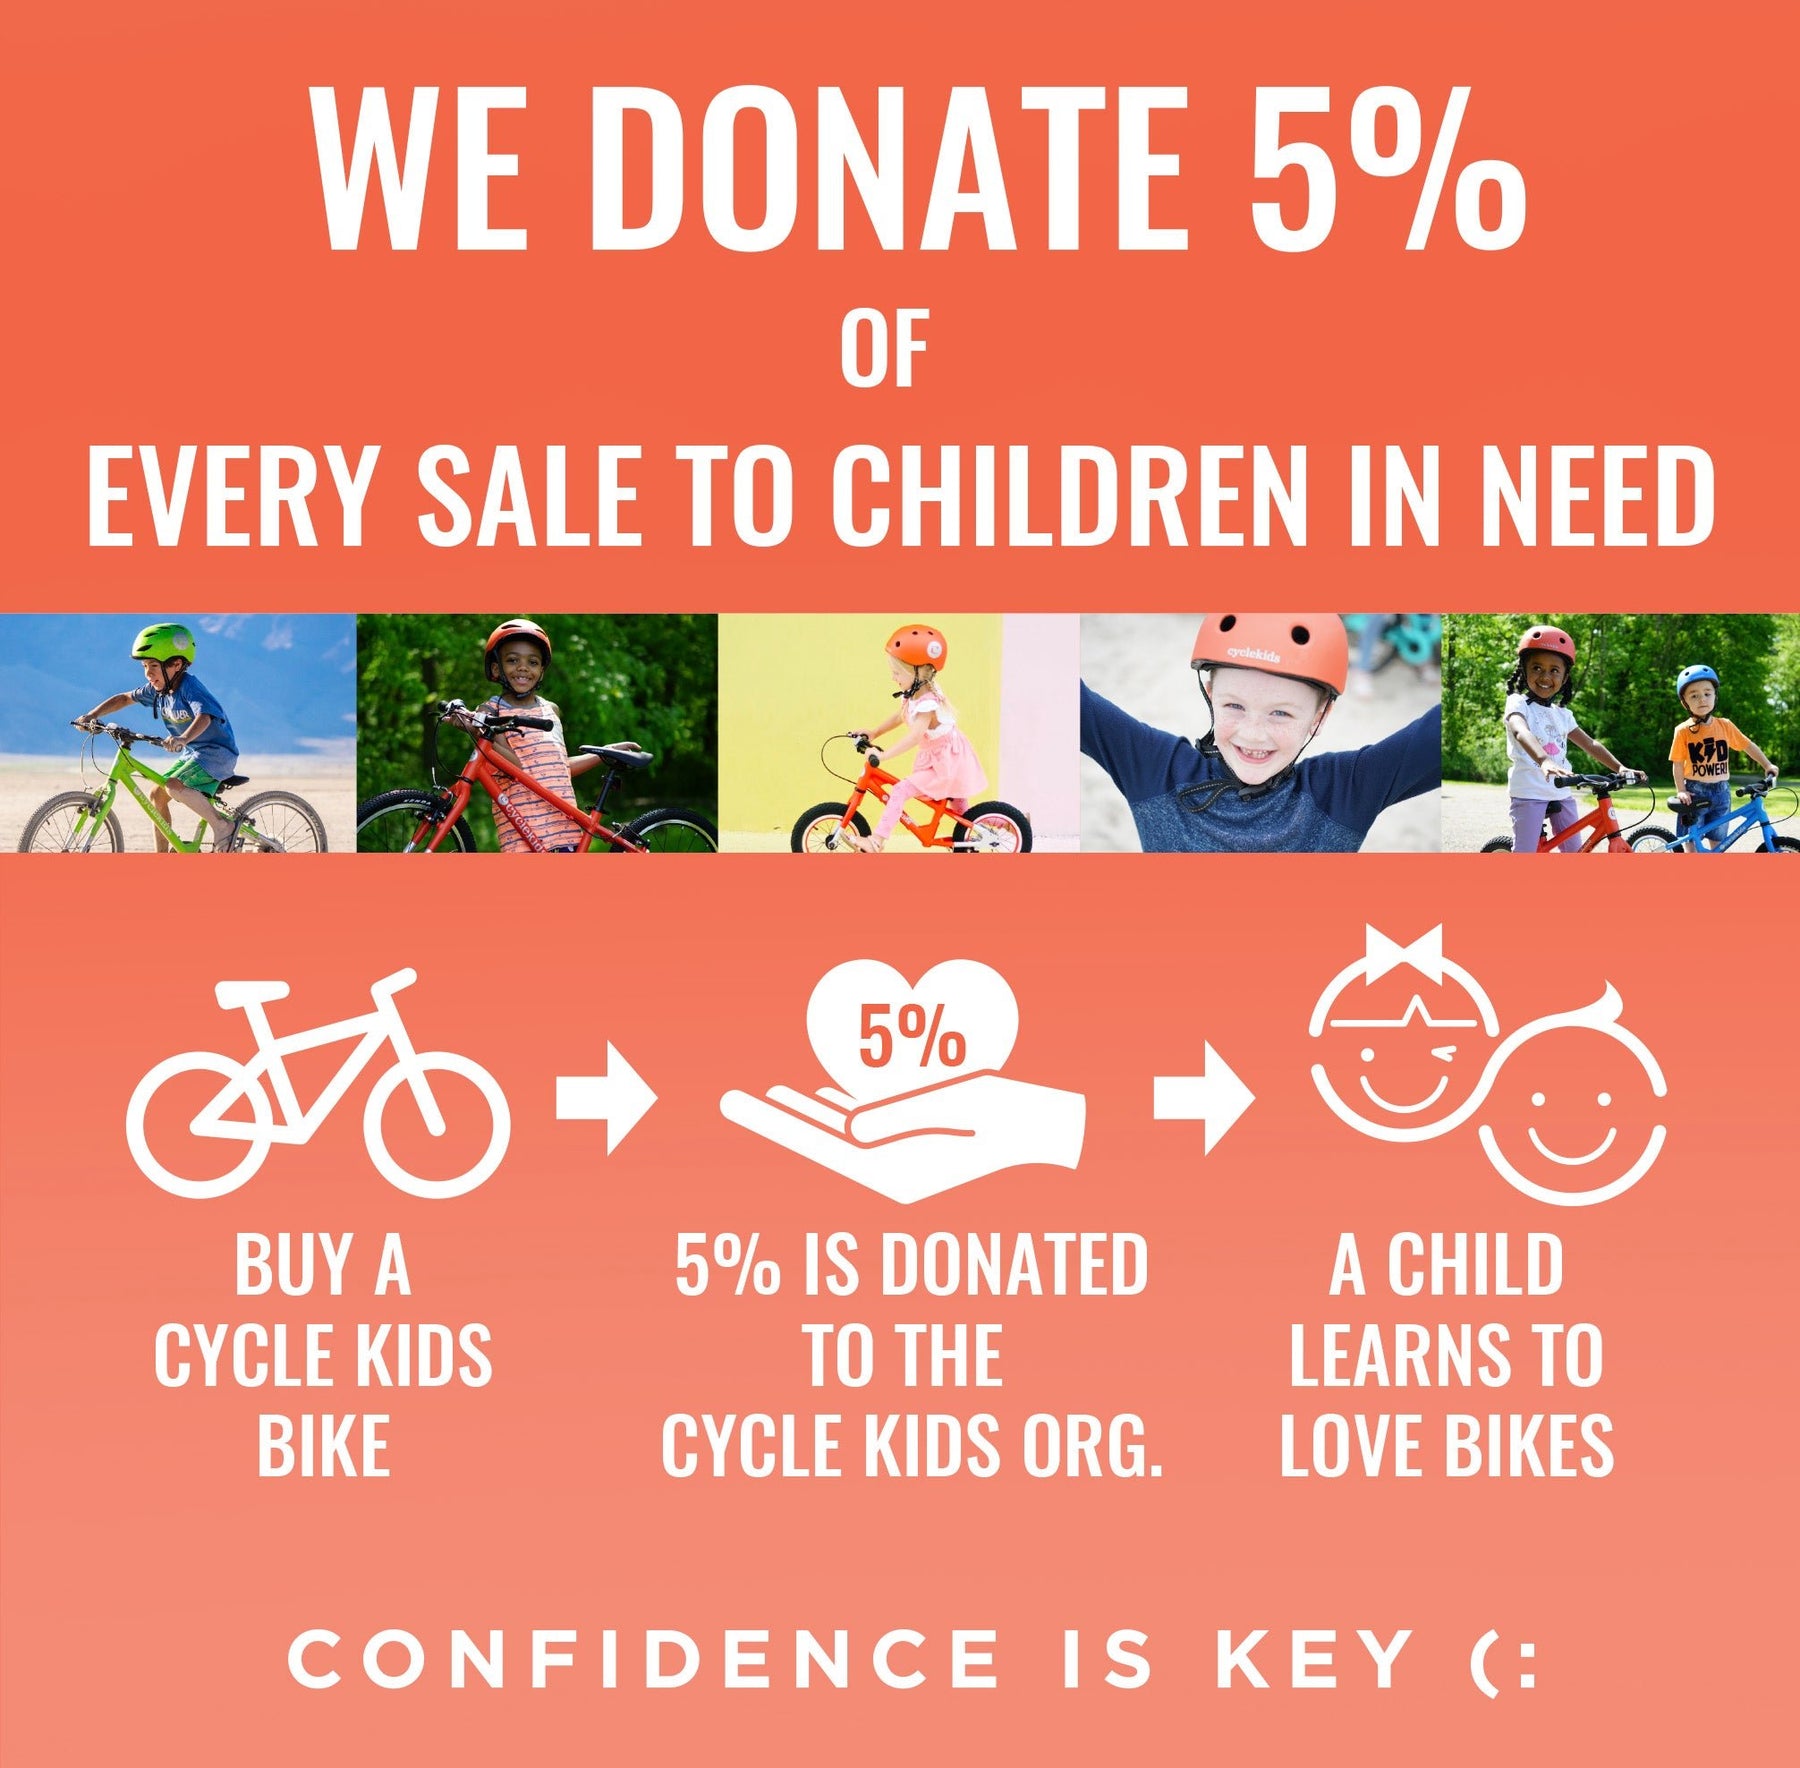 CYCLE Kids Bikes donates 5% of every sale to children in need. Buy a CYCLE Kids bike, 5% is donated to the CYCLE Kids Organization and a child learns to love bikes.